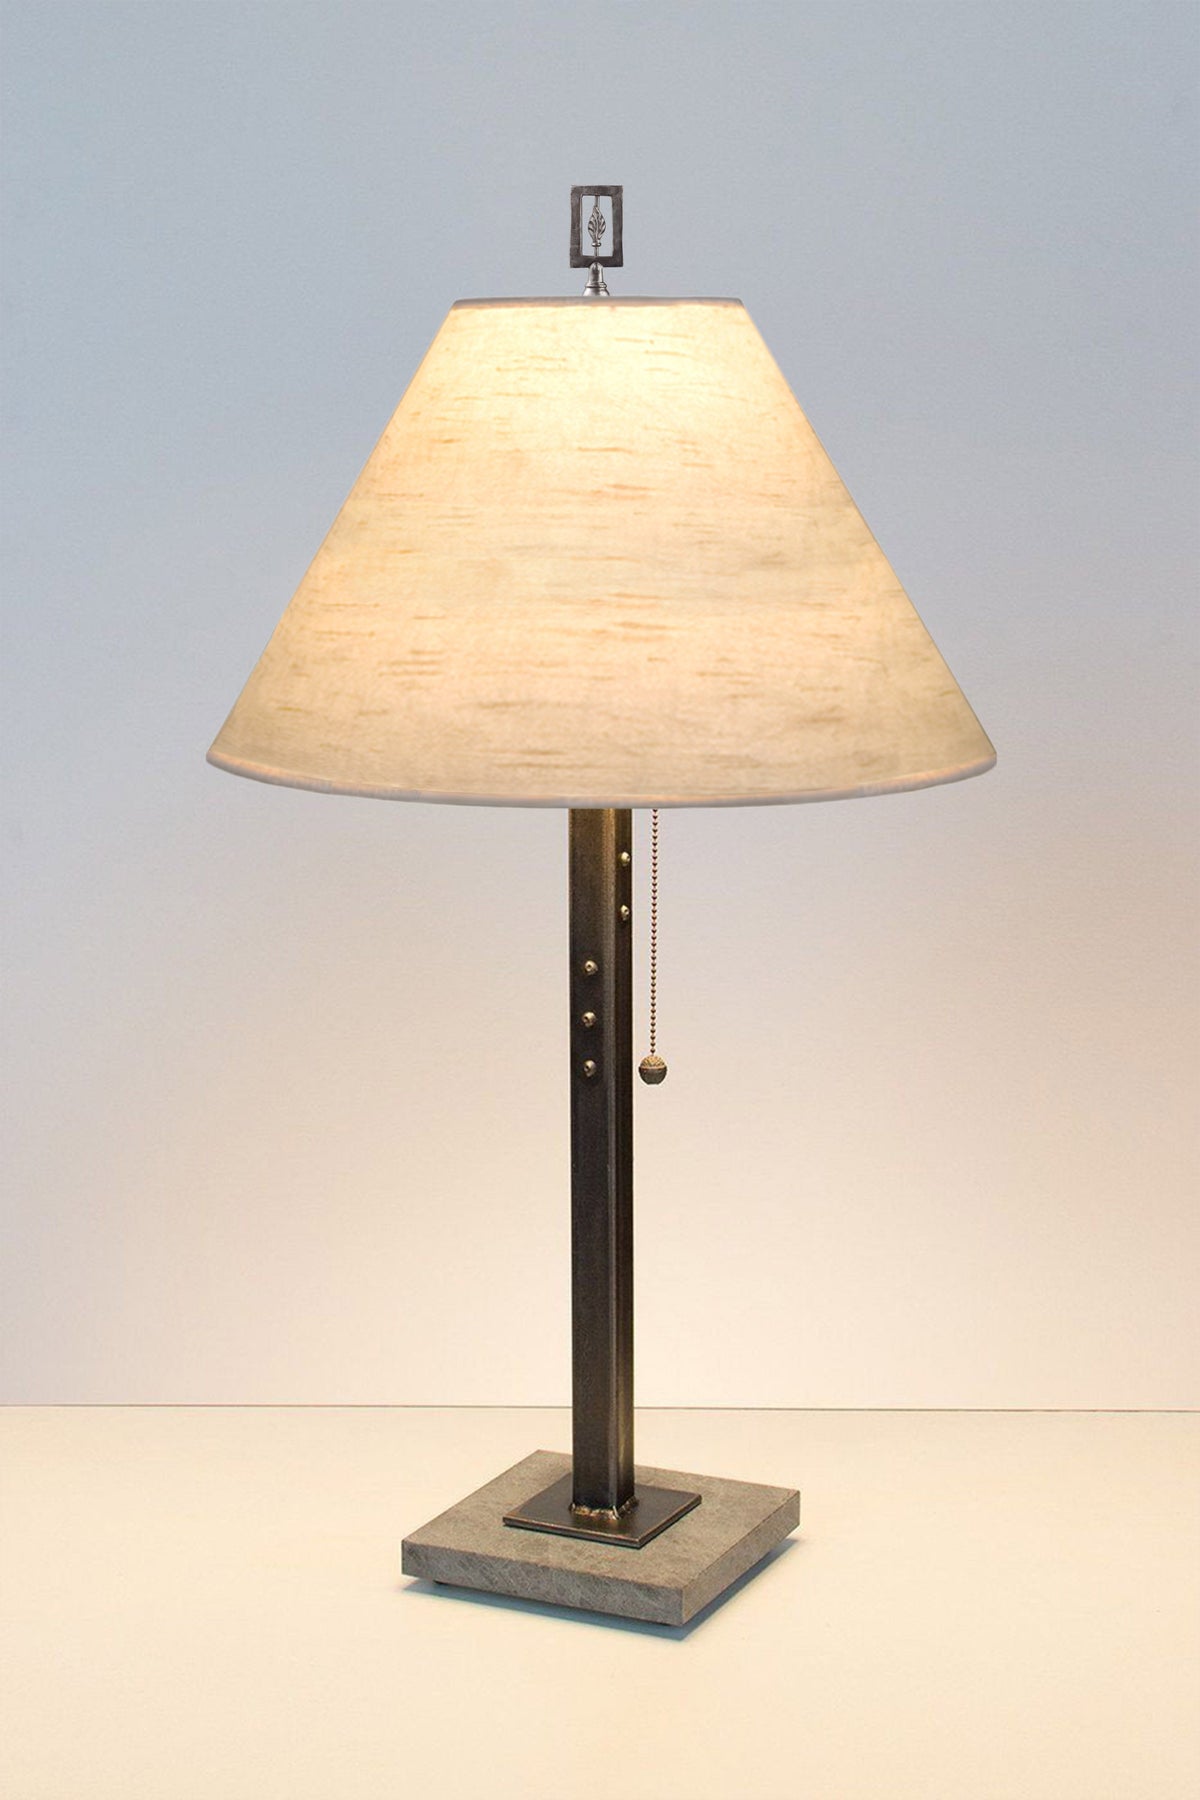 Janna Ugone &amp; Co Table Lamps Steel Table Lamp with Medium Conical Shade in Simply Birch